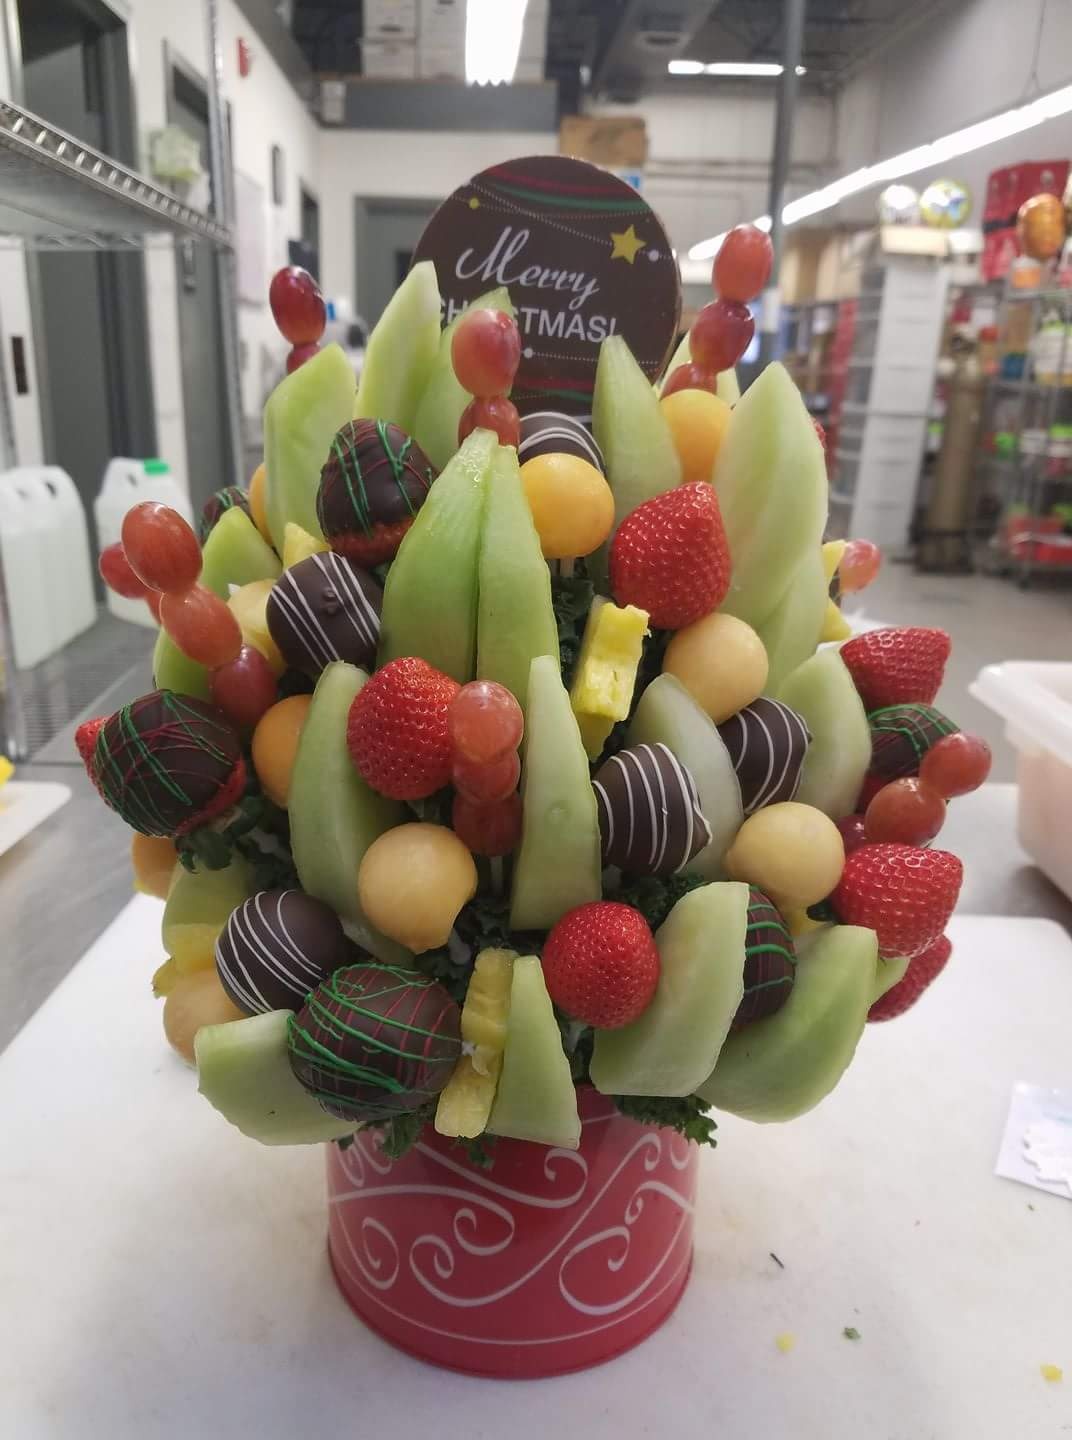 Exciting Edible Arrangements Opportunity with Steady Sales, Loyal